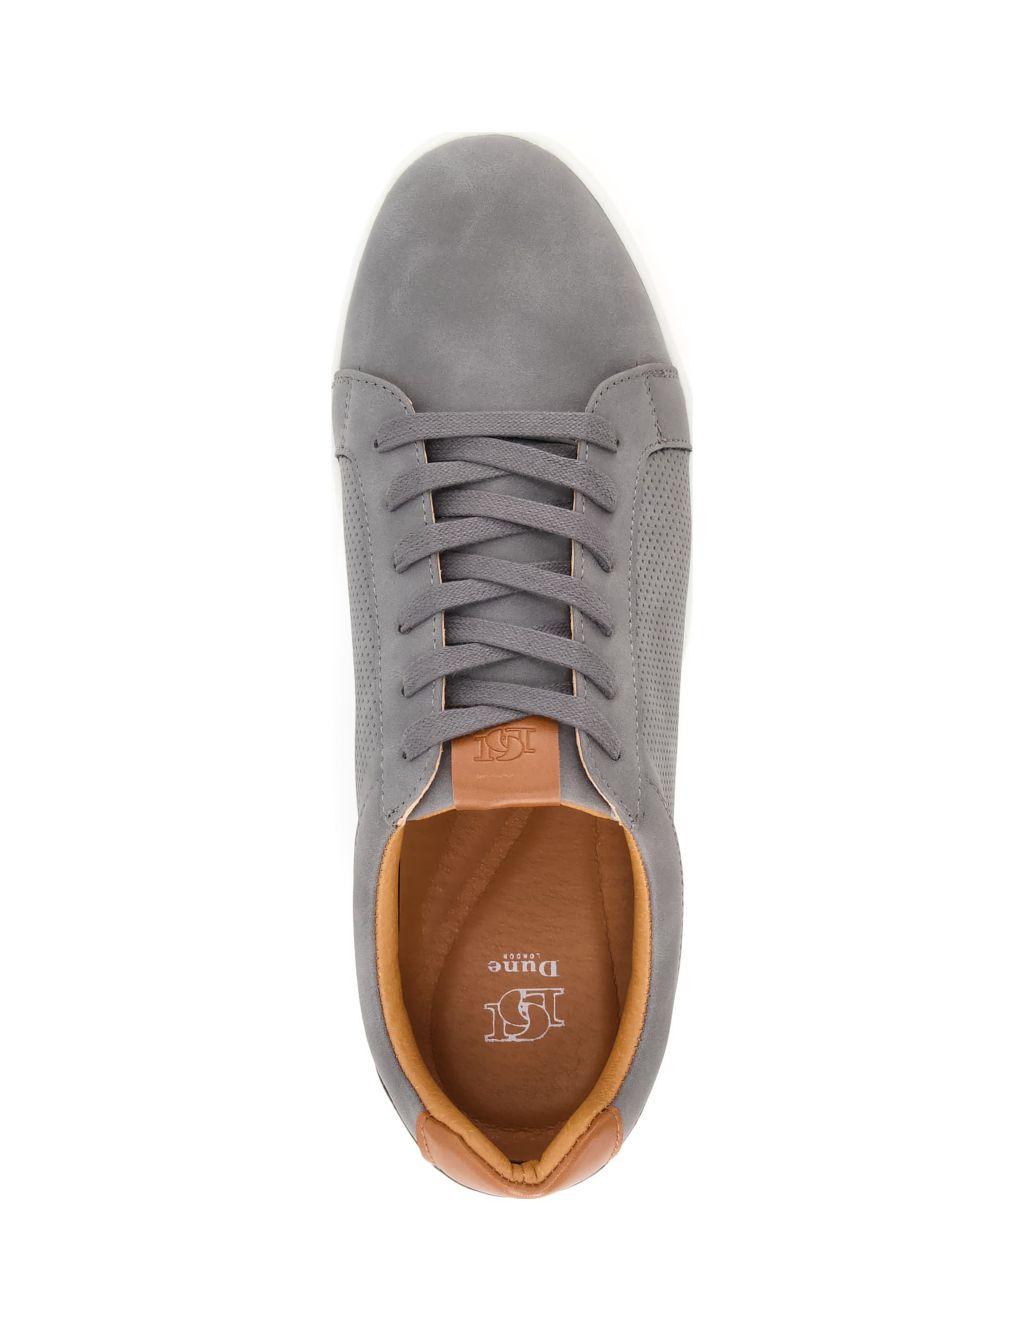 Suedette Lace Up Trainers image 3